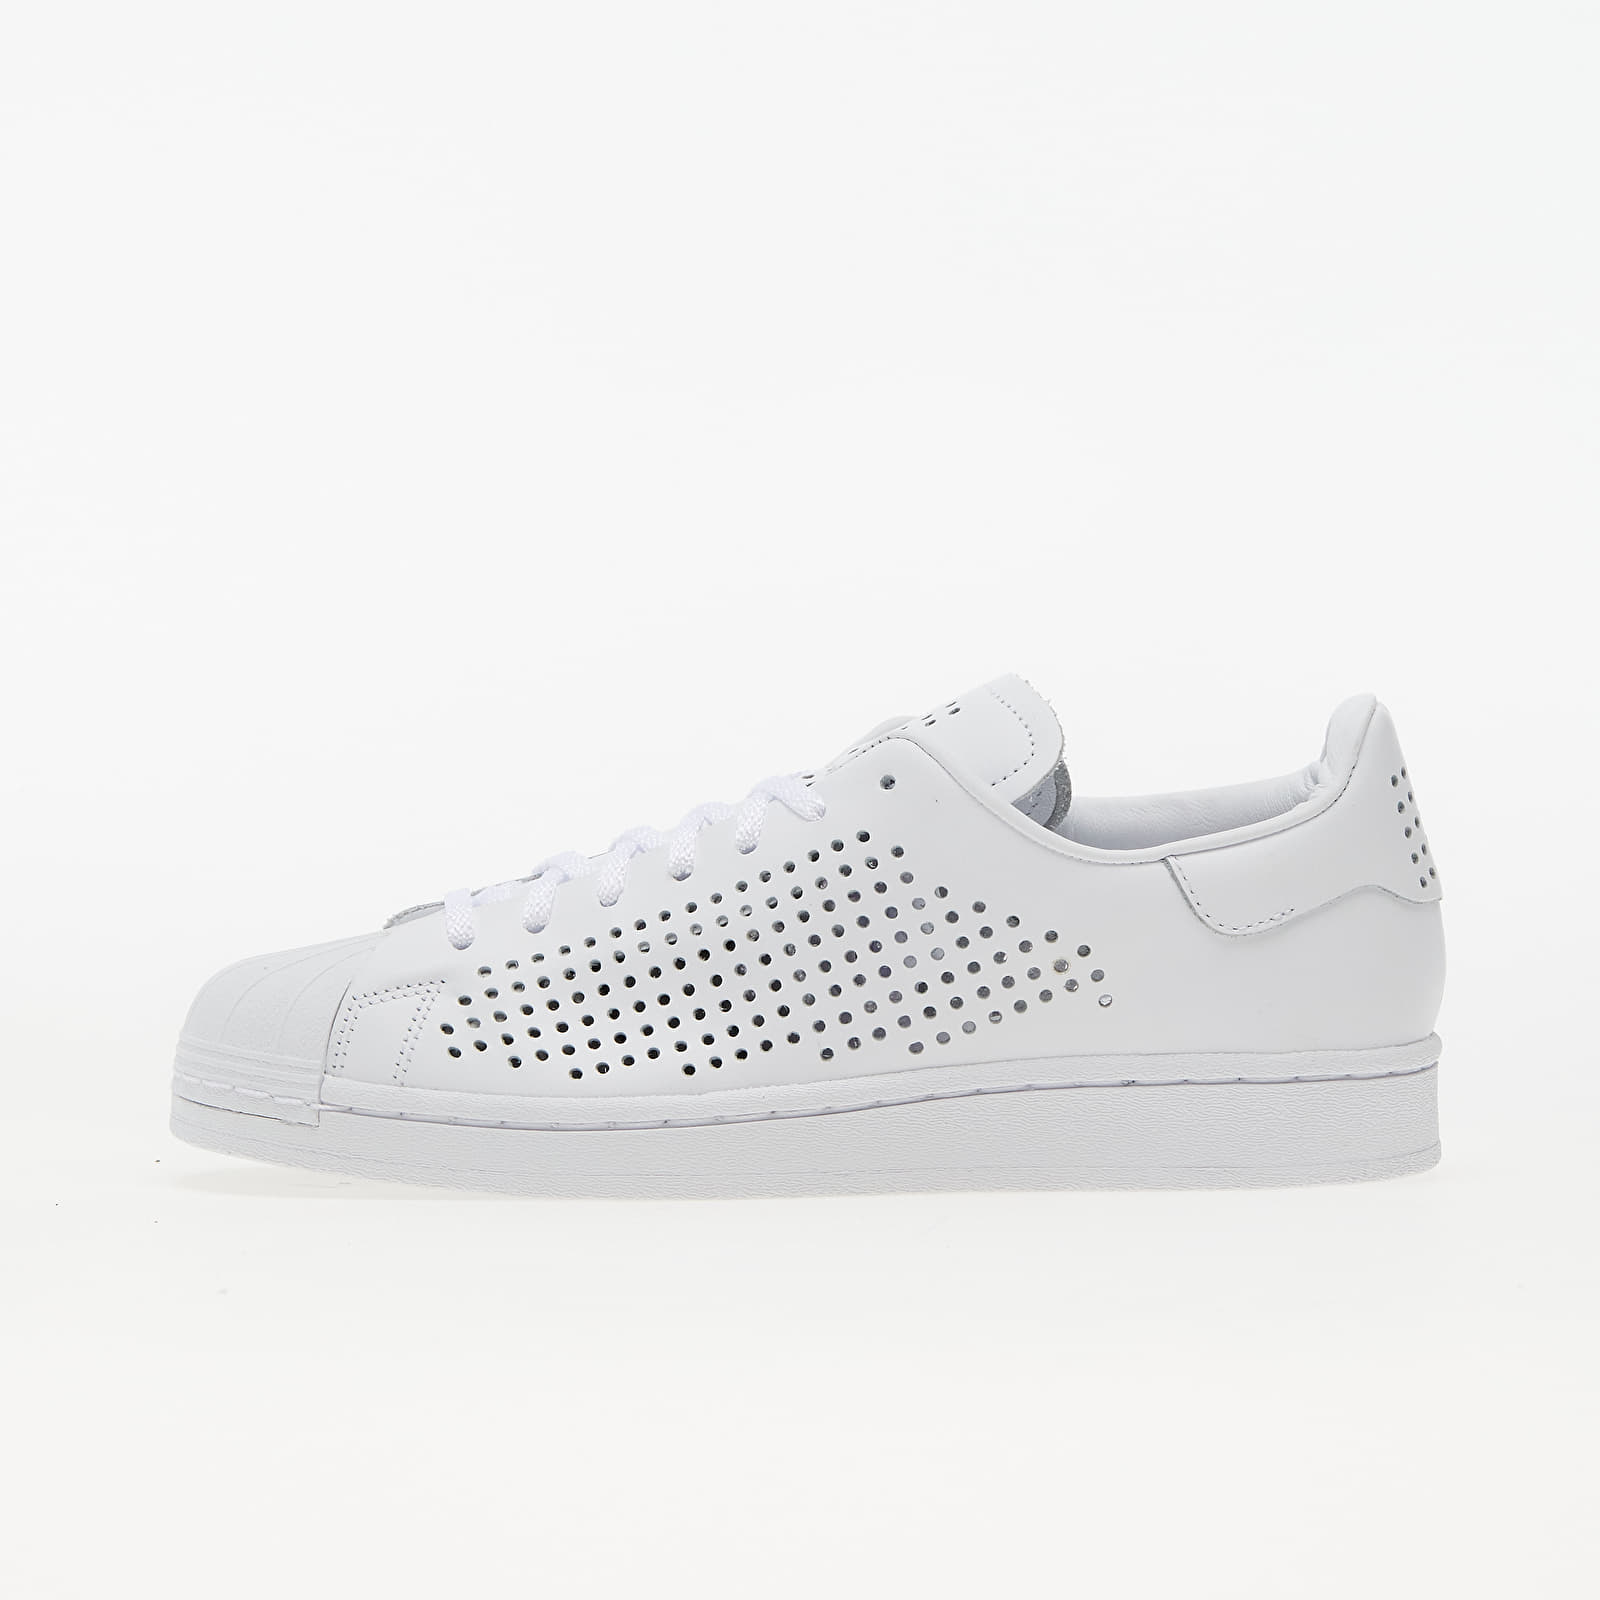 Men's shoes adidas Superstar Ftw White/ Ftw White/ Grey One